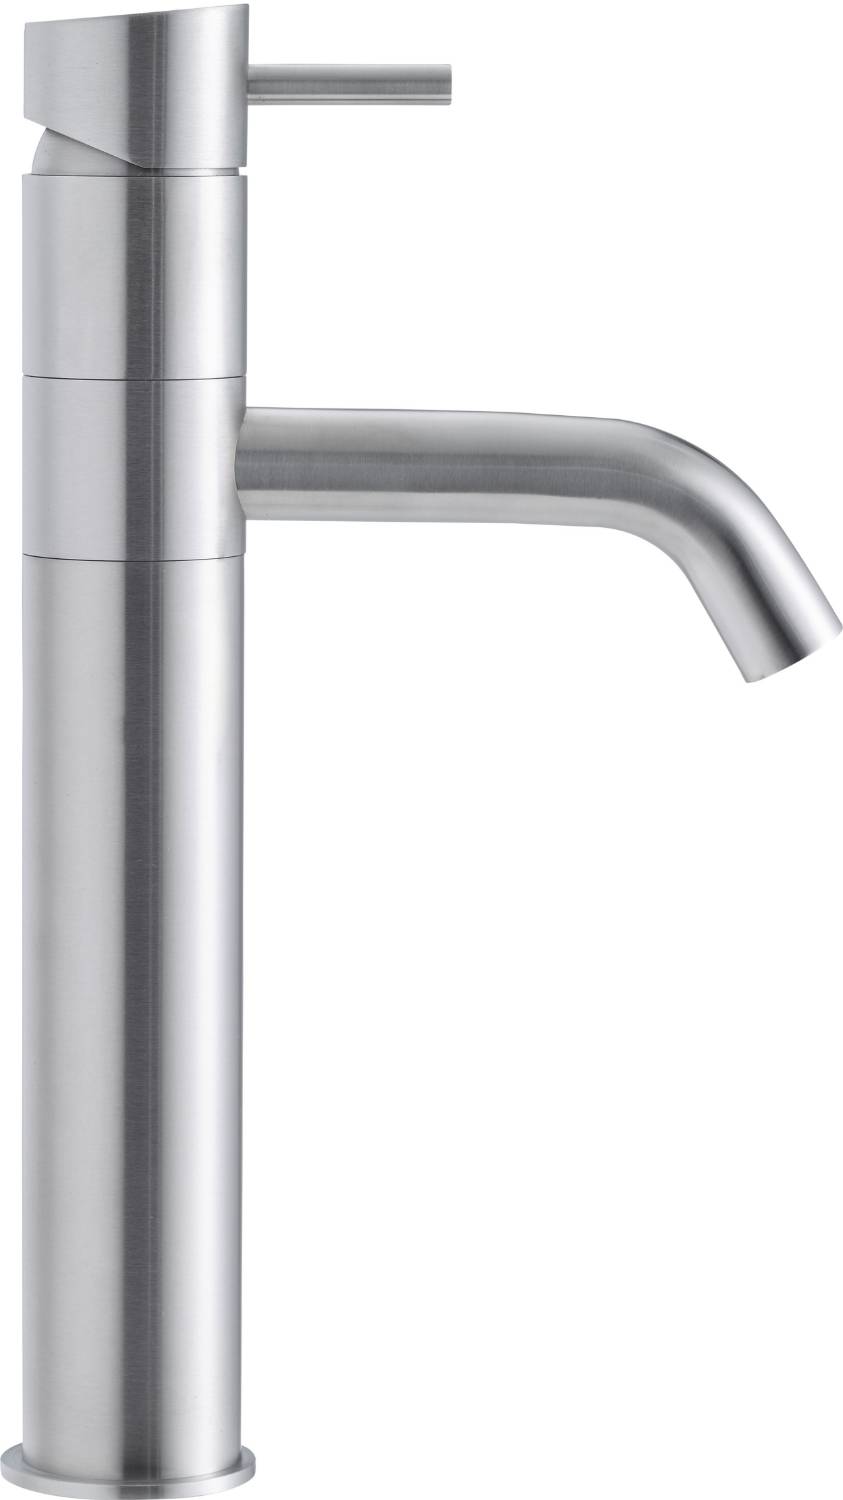 Qtoo collection - QT1200M tall single lever tap - Tall single lever tap